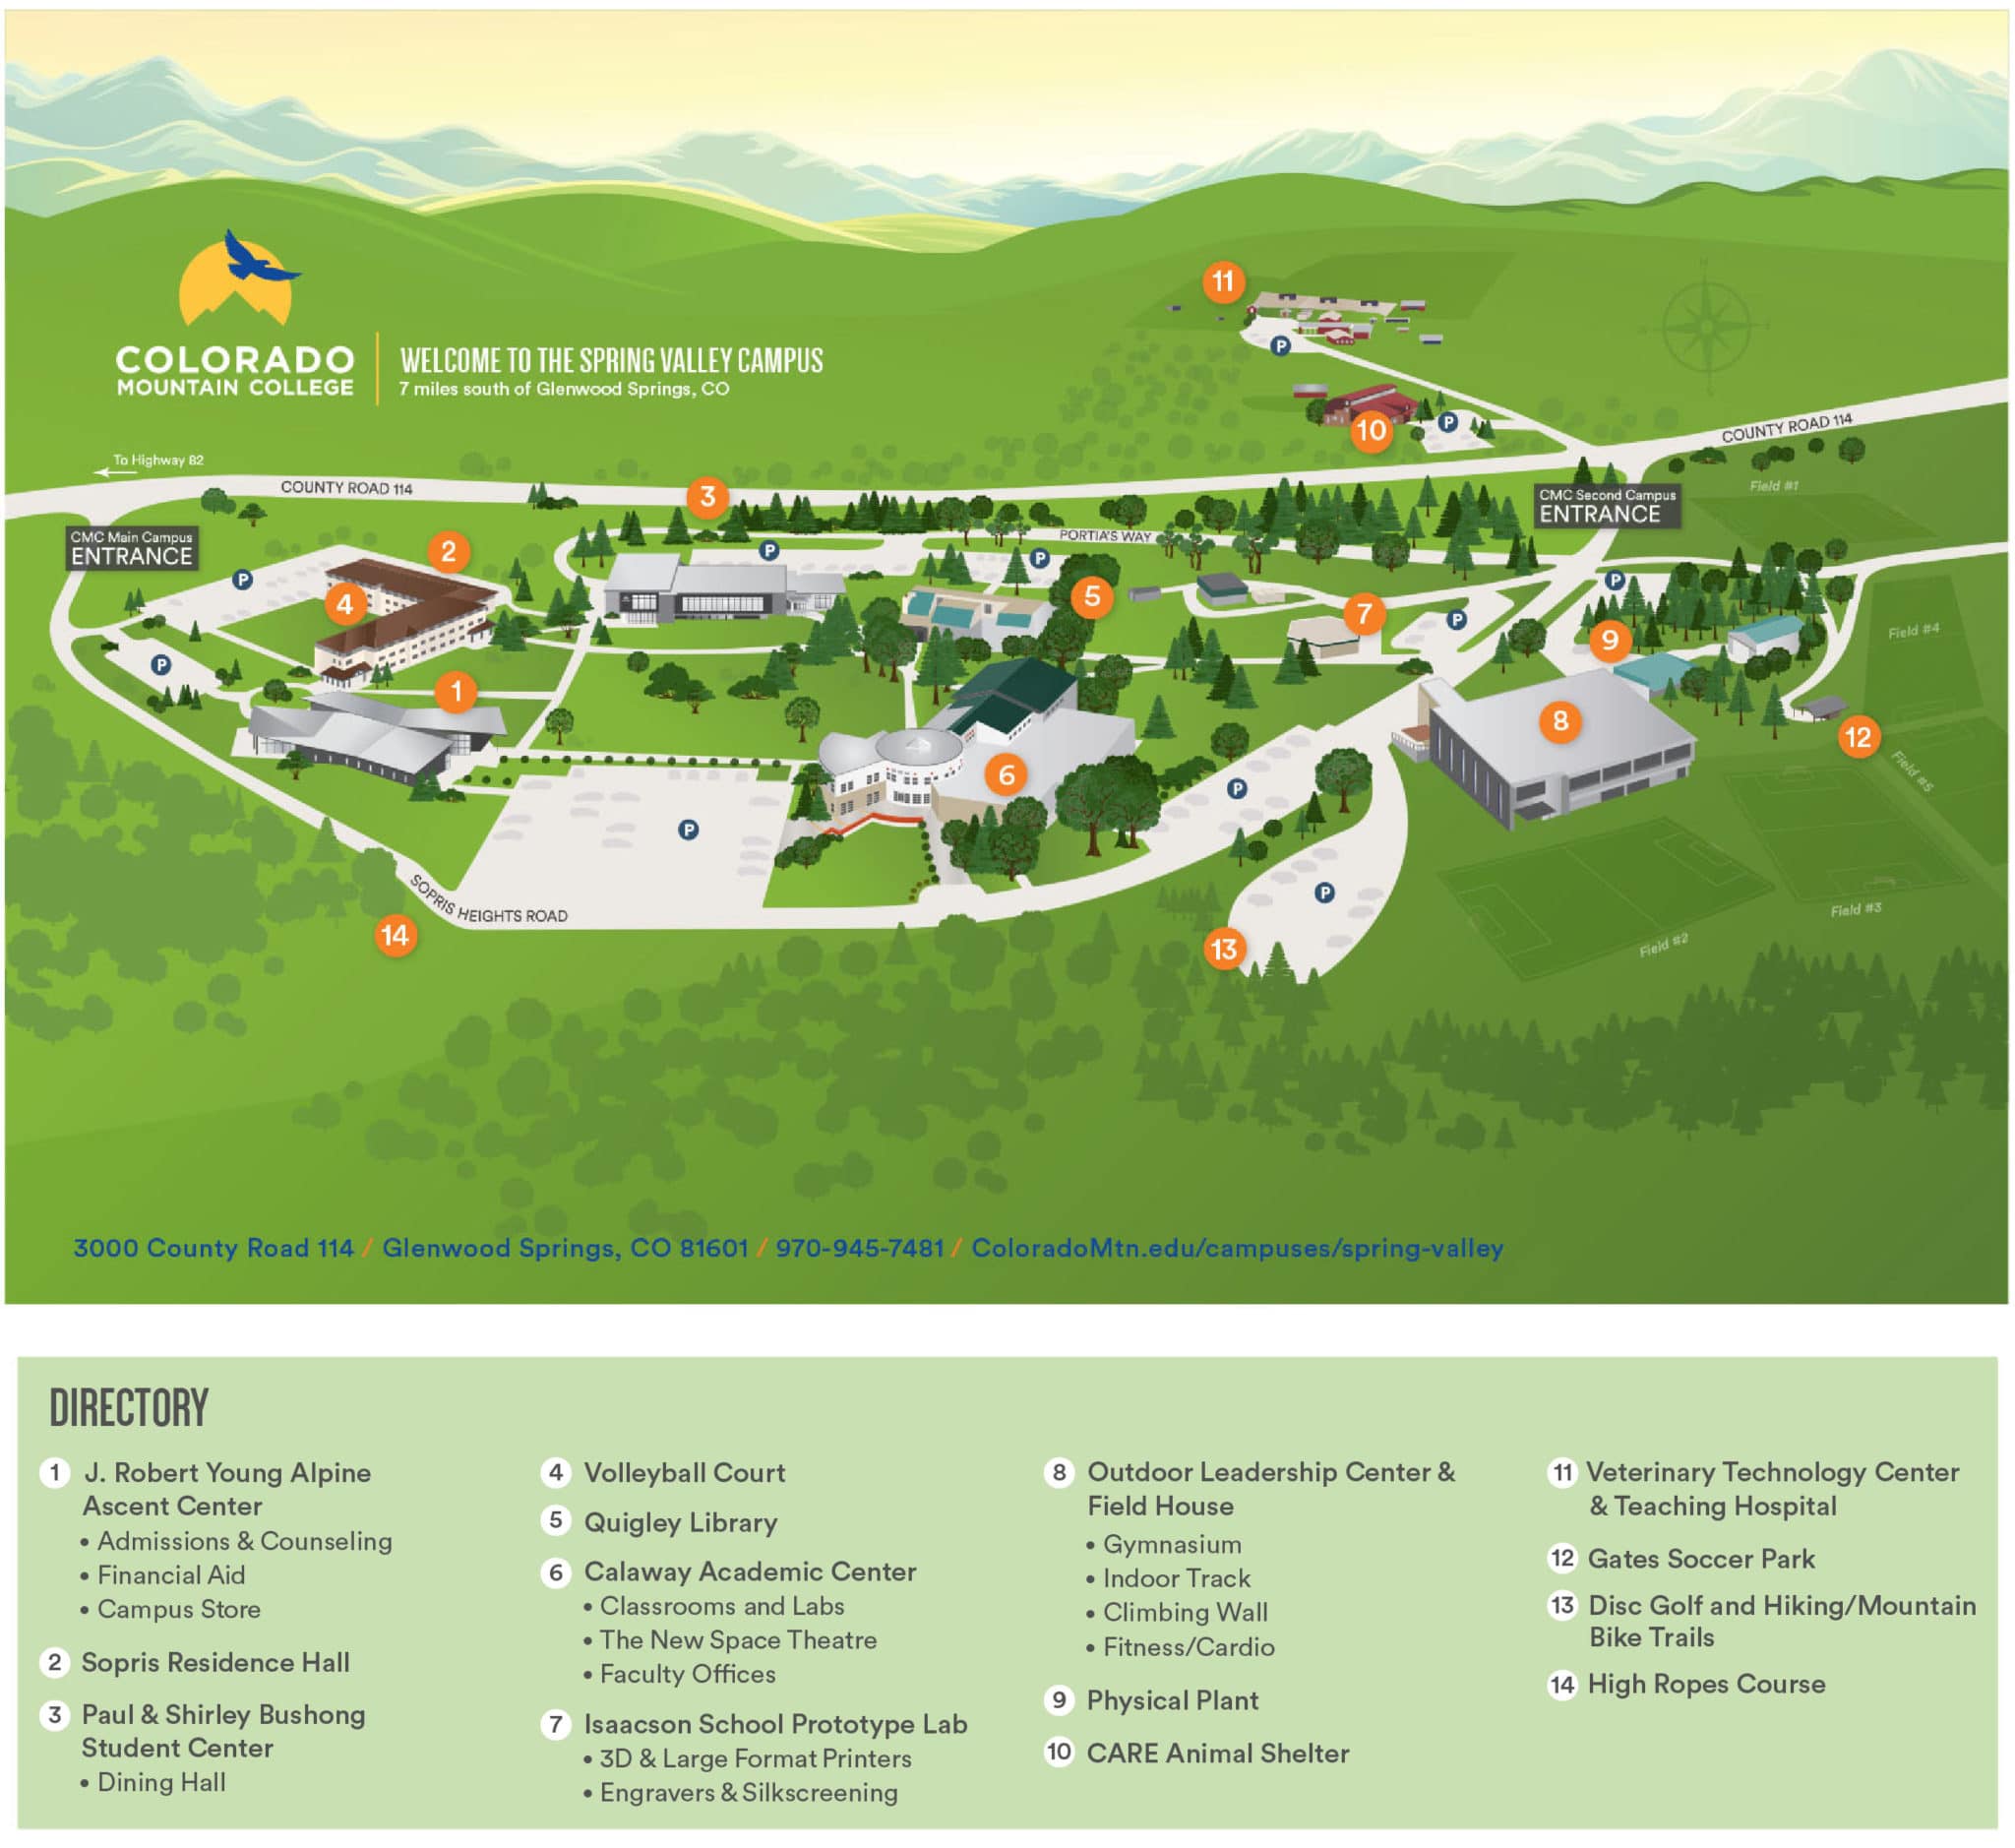 Illustrated map of the Spring Valley campus